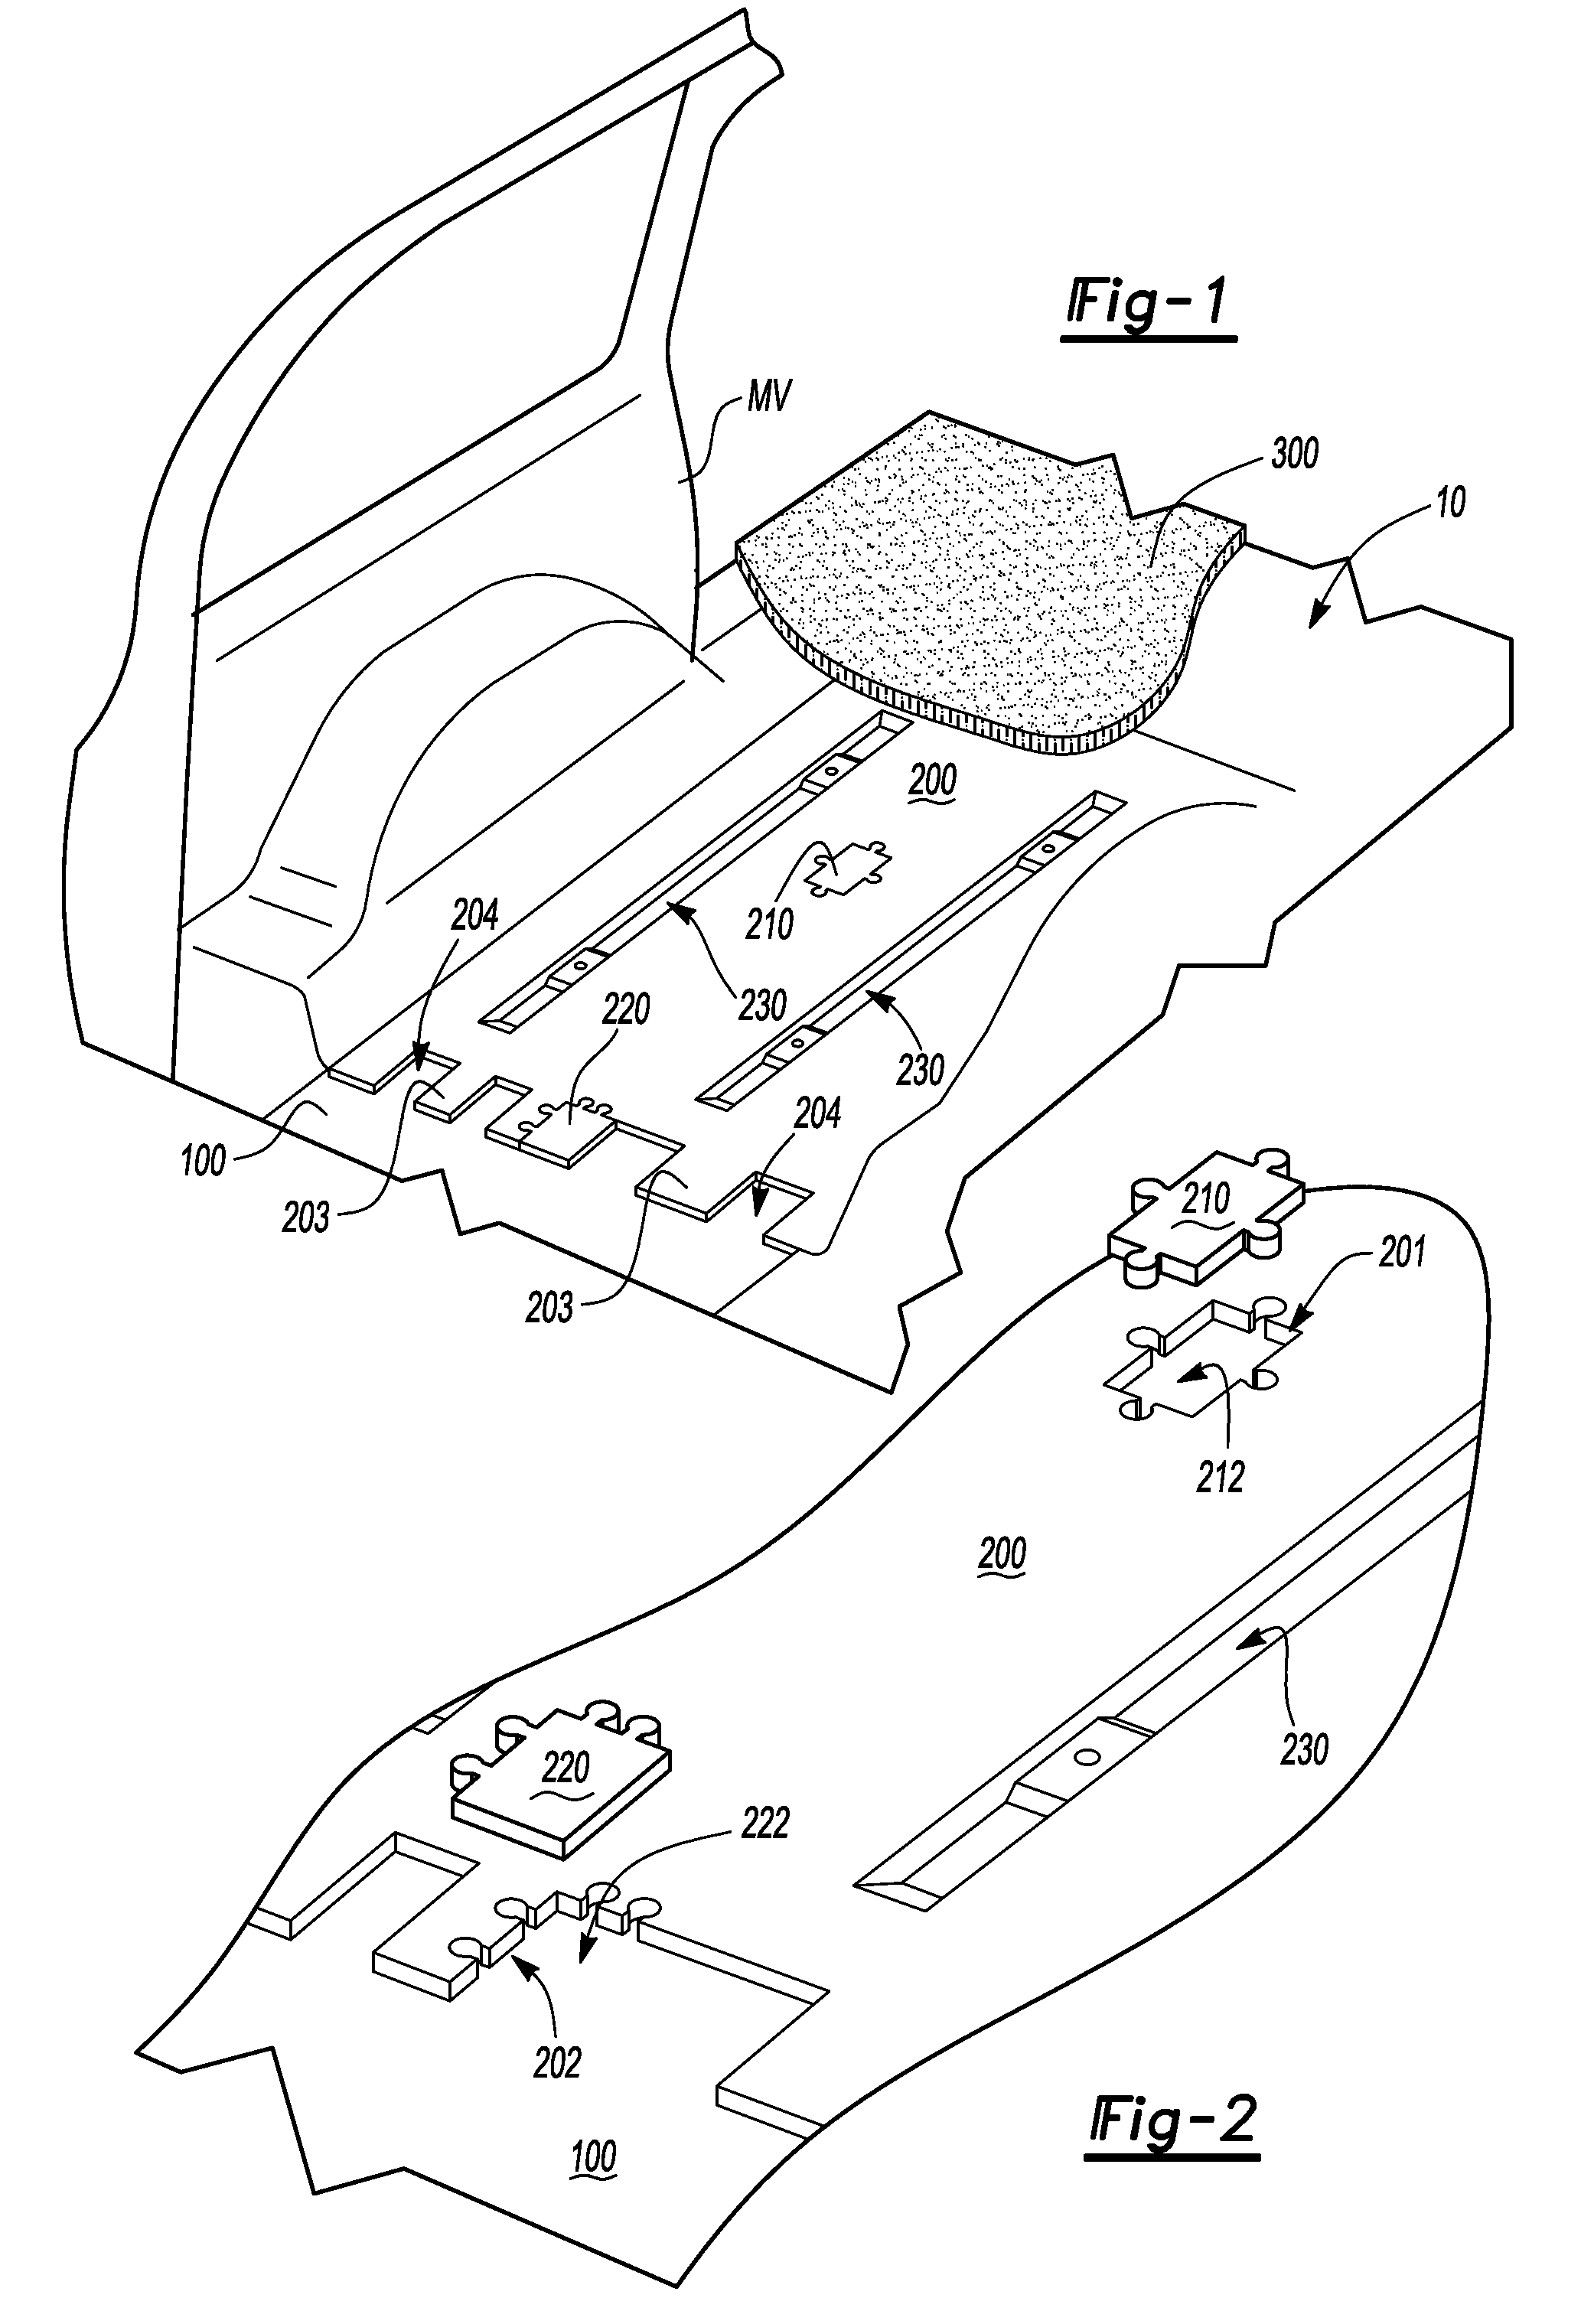 Pad for use under a covering layer